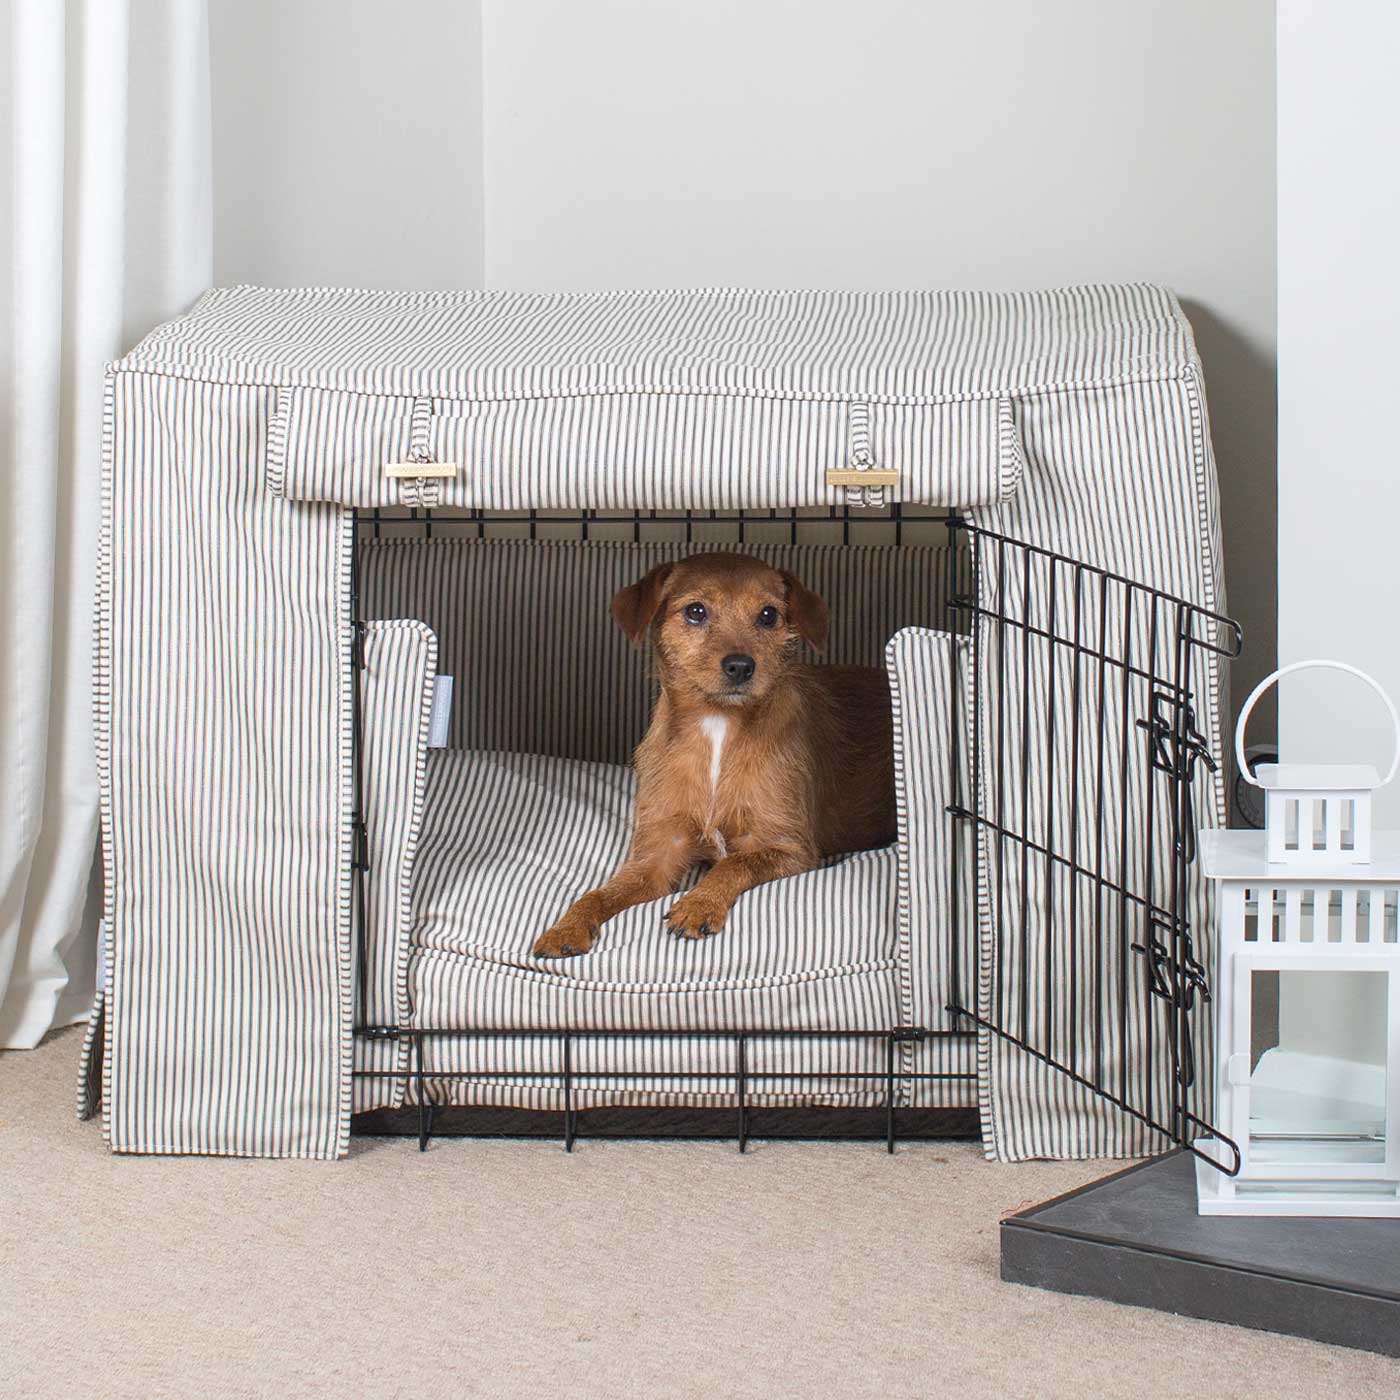 Luxury Black Dog Cage Set With Cushion, Bumper and Cage Cover, in Regency Stripe. The Perfect Dog Cage For The Ultimate Naptime, Available Now at Lords & Labradors US